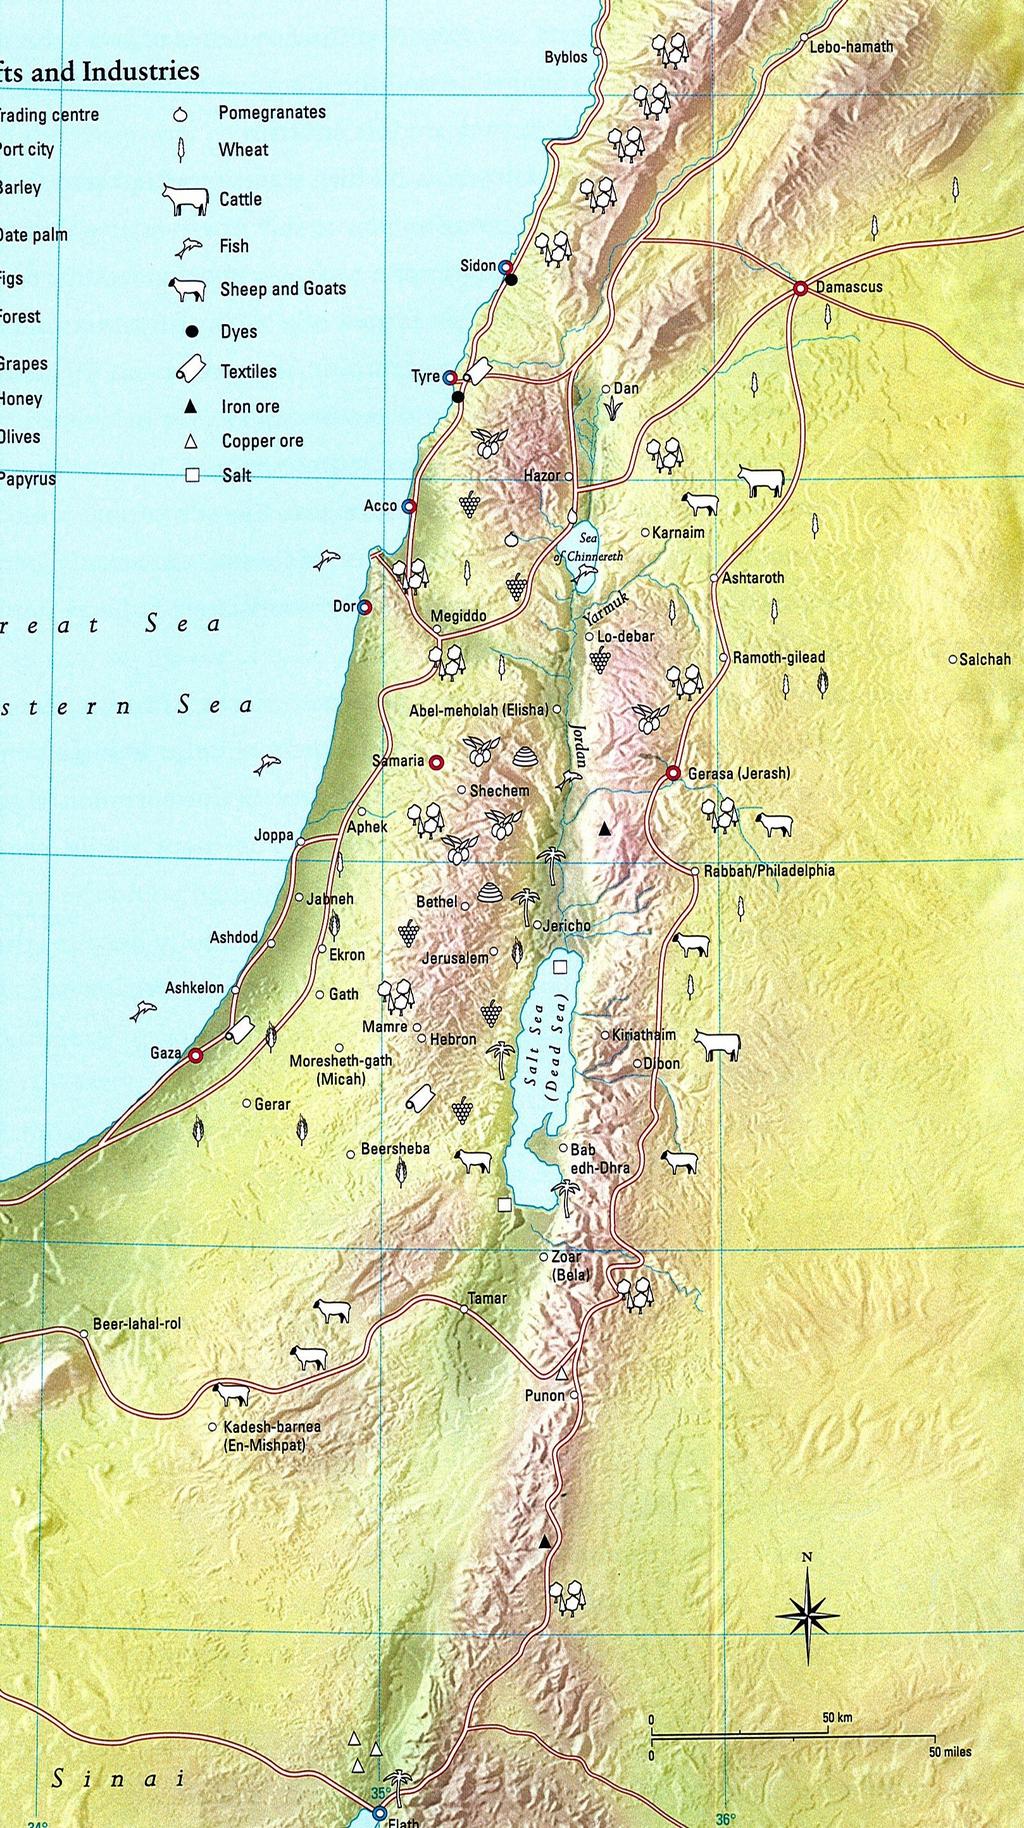 Pg. 10 Creatig Your Ow Map of Israel Usig the space provided o this page, practice makig a map of Israel with the followig elemets: 3 Waters 1. Mediterraea Sea 2. Sea of Galilee 3. Dead Sea 4.